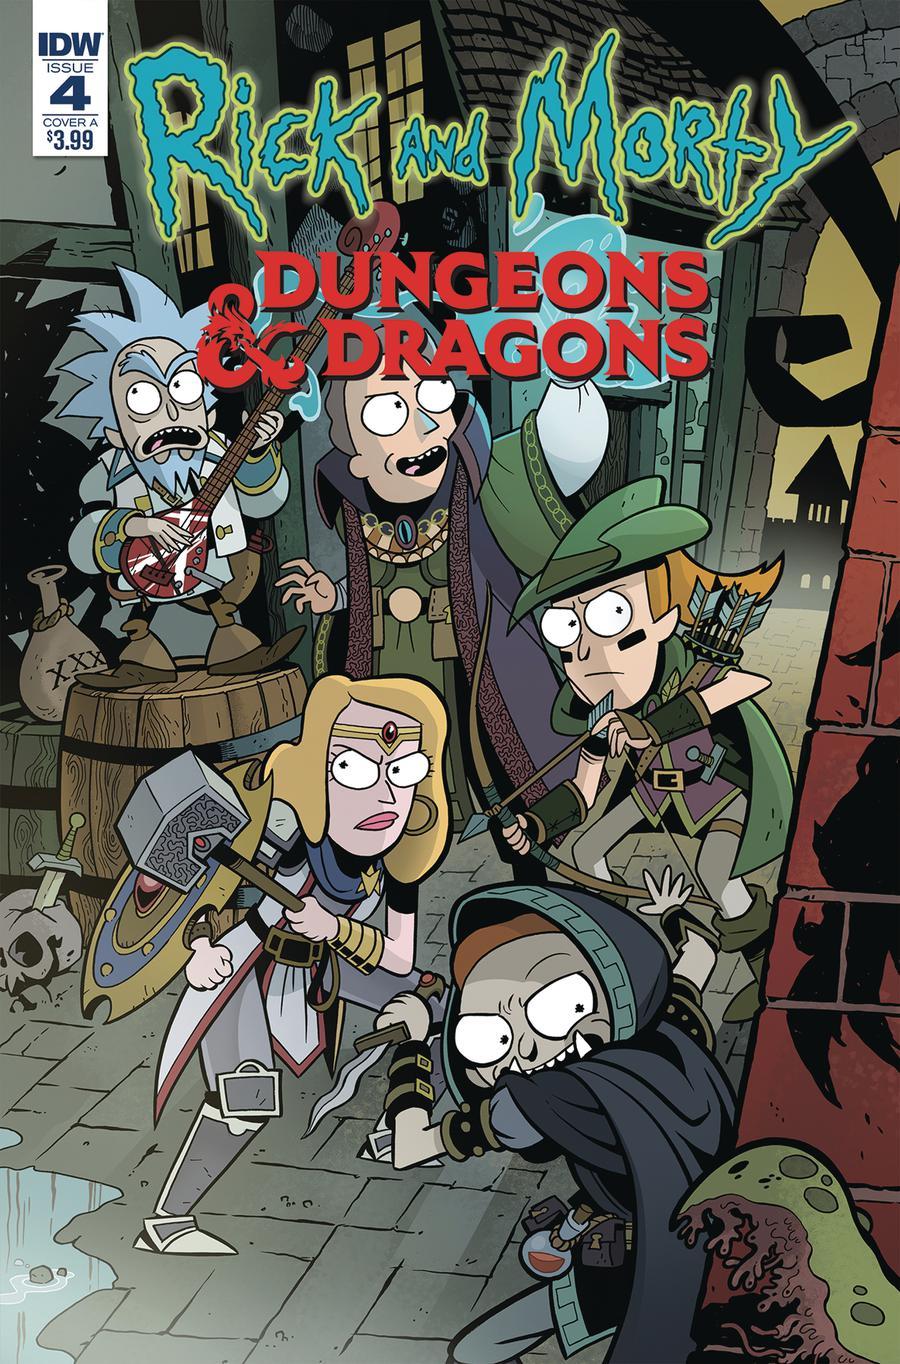 Rick And Morty vs Dungeons & Dragons Vol. 1 #4